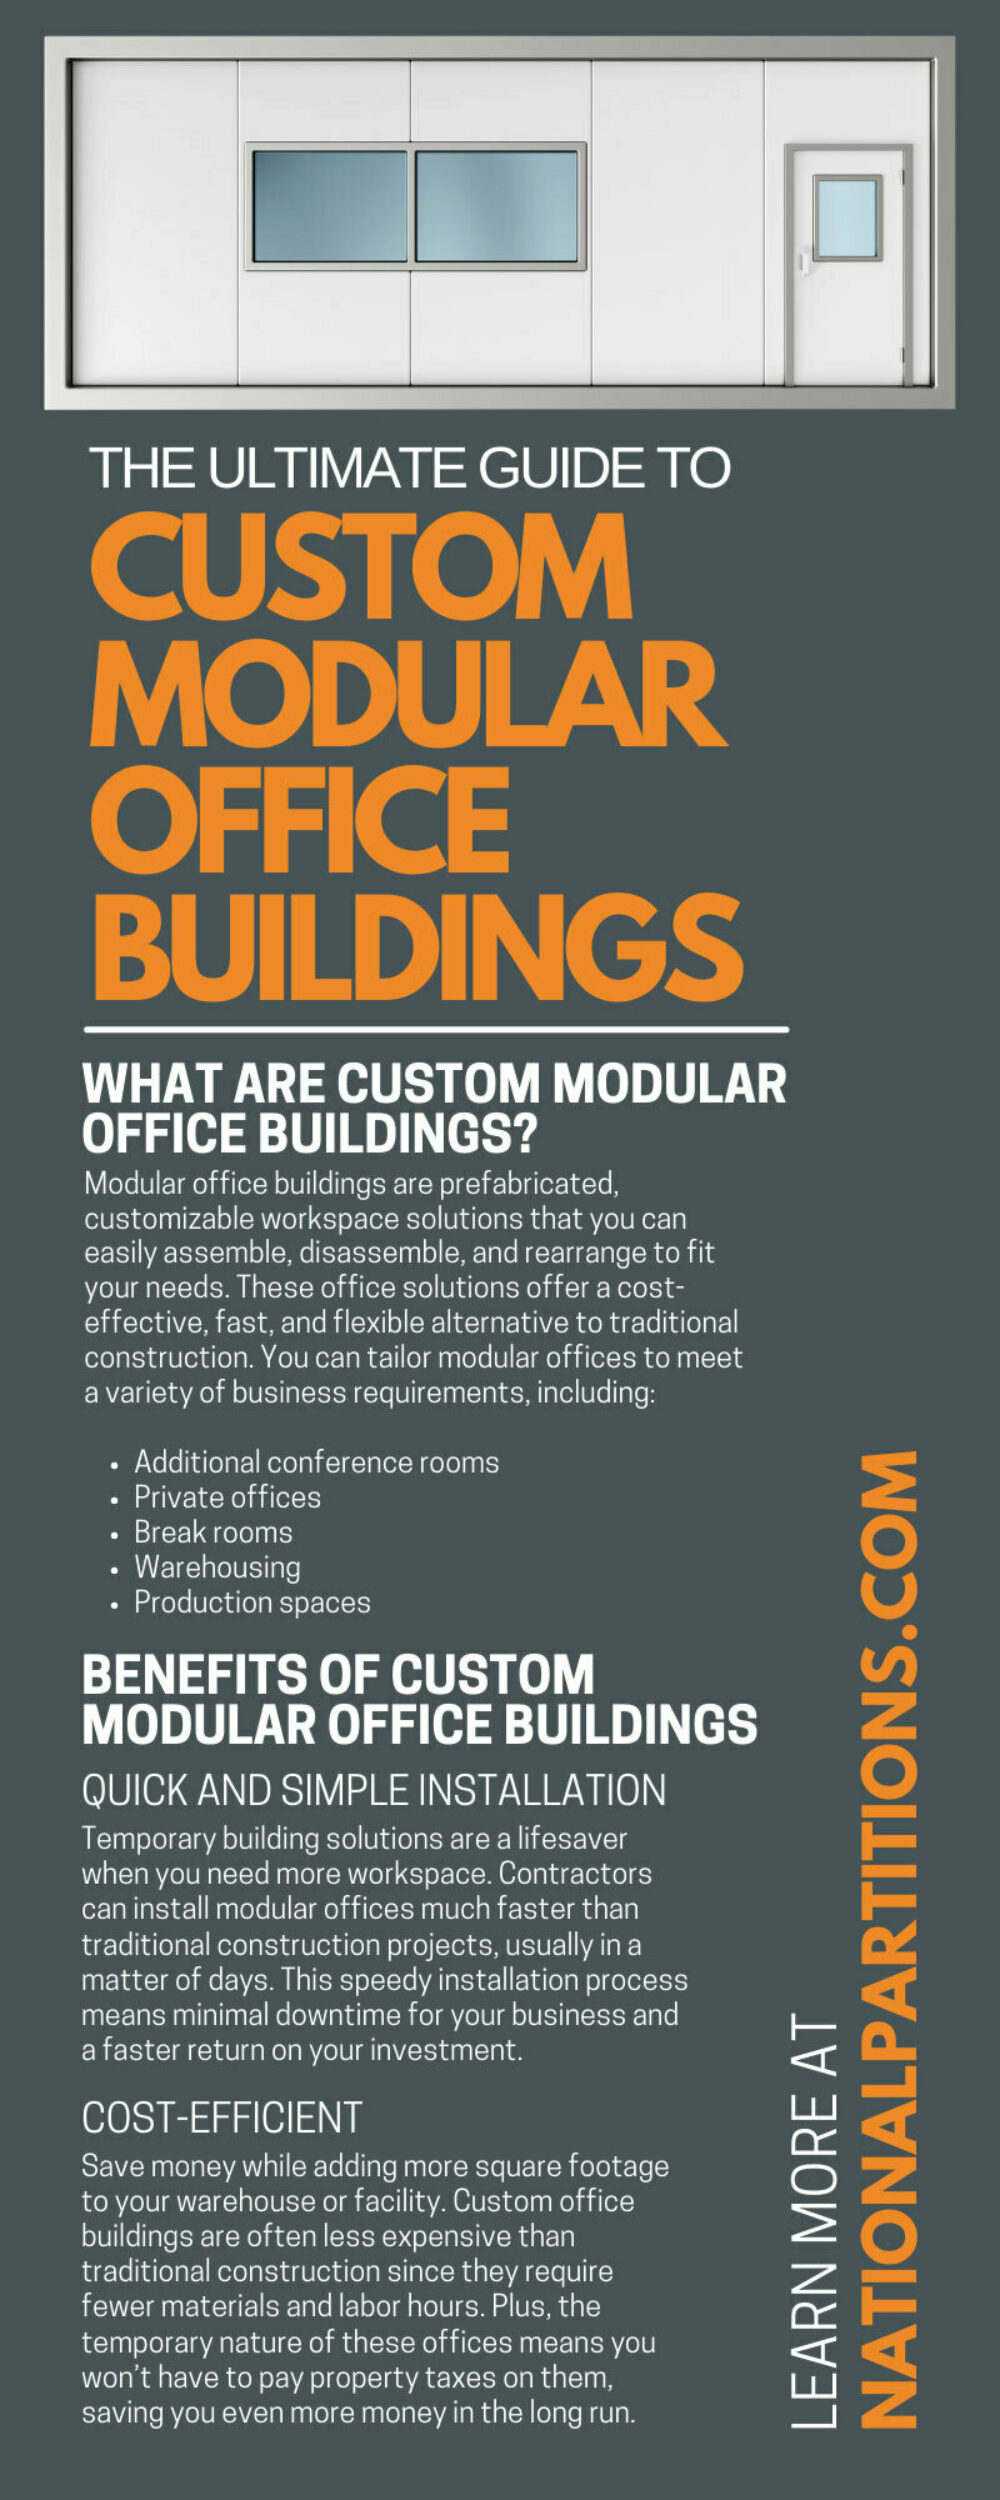 National Partitions 262847 Modular Office Buildings infographic1